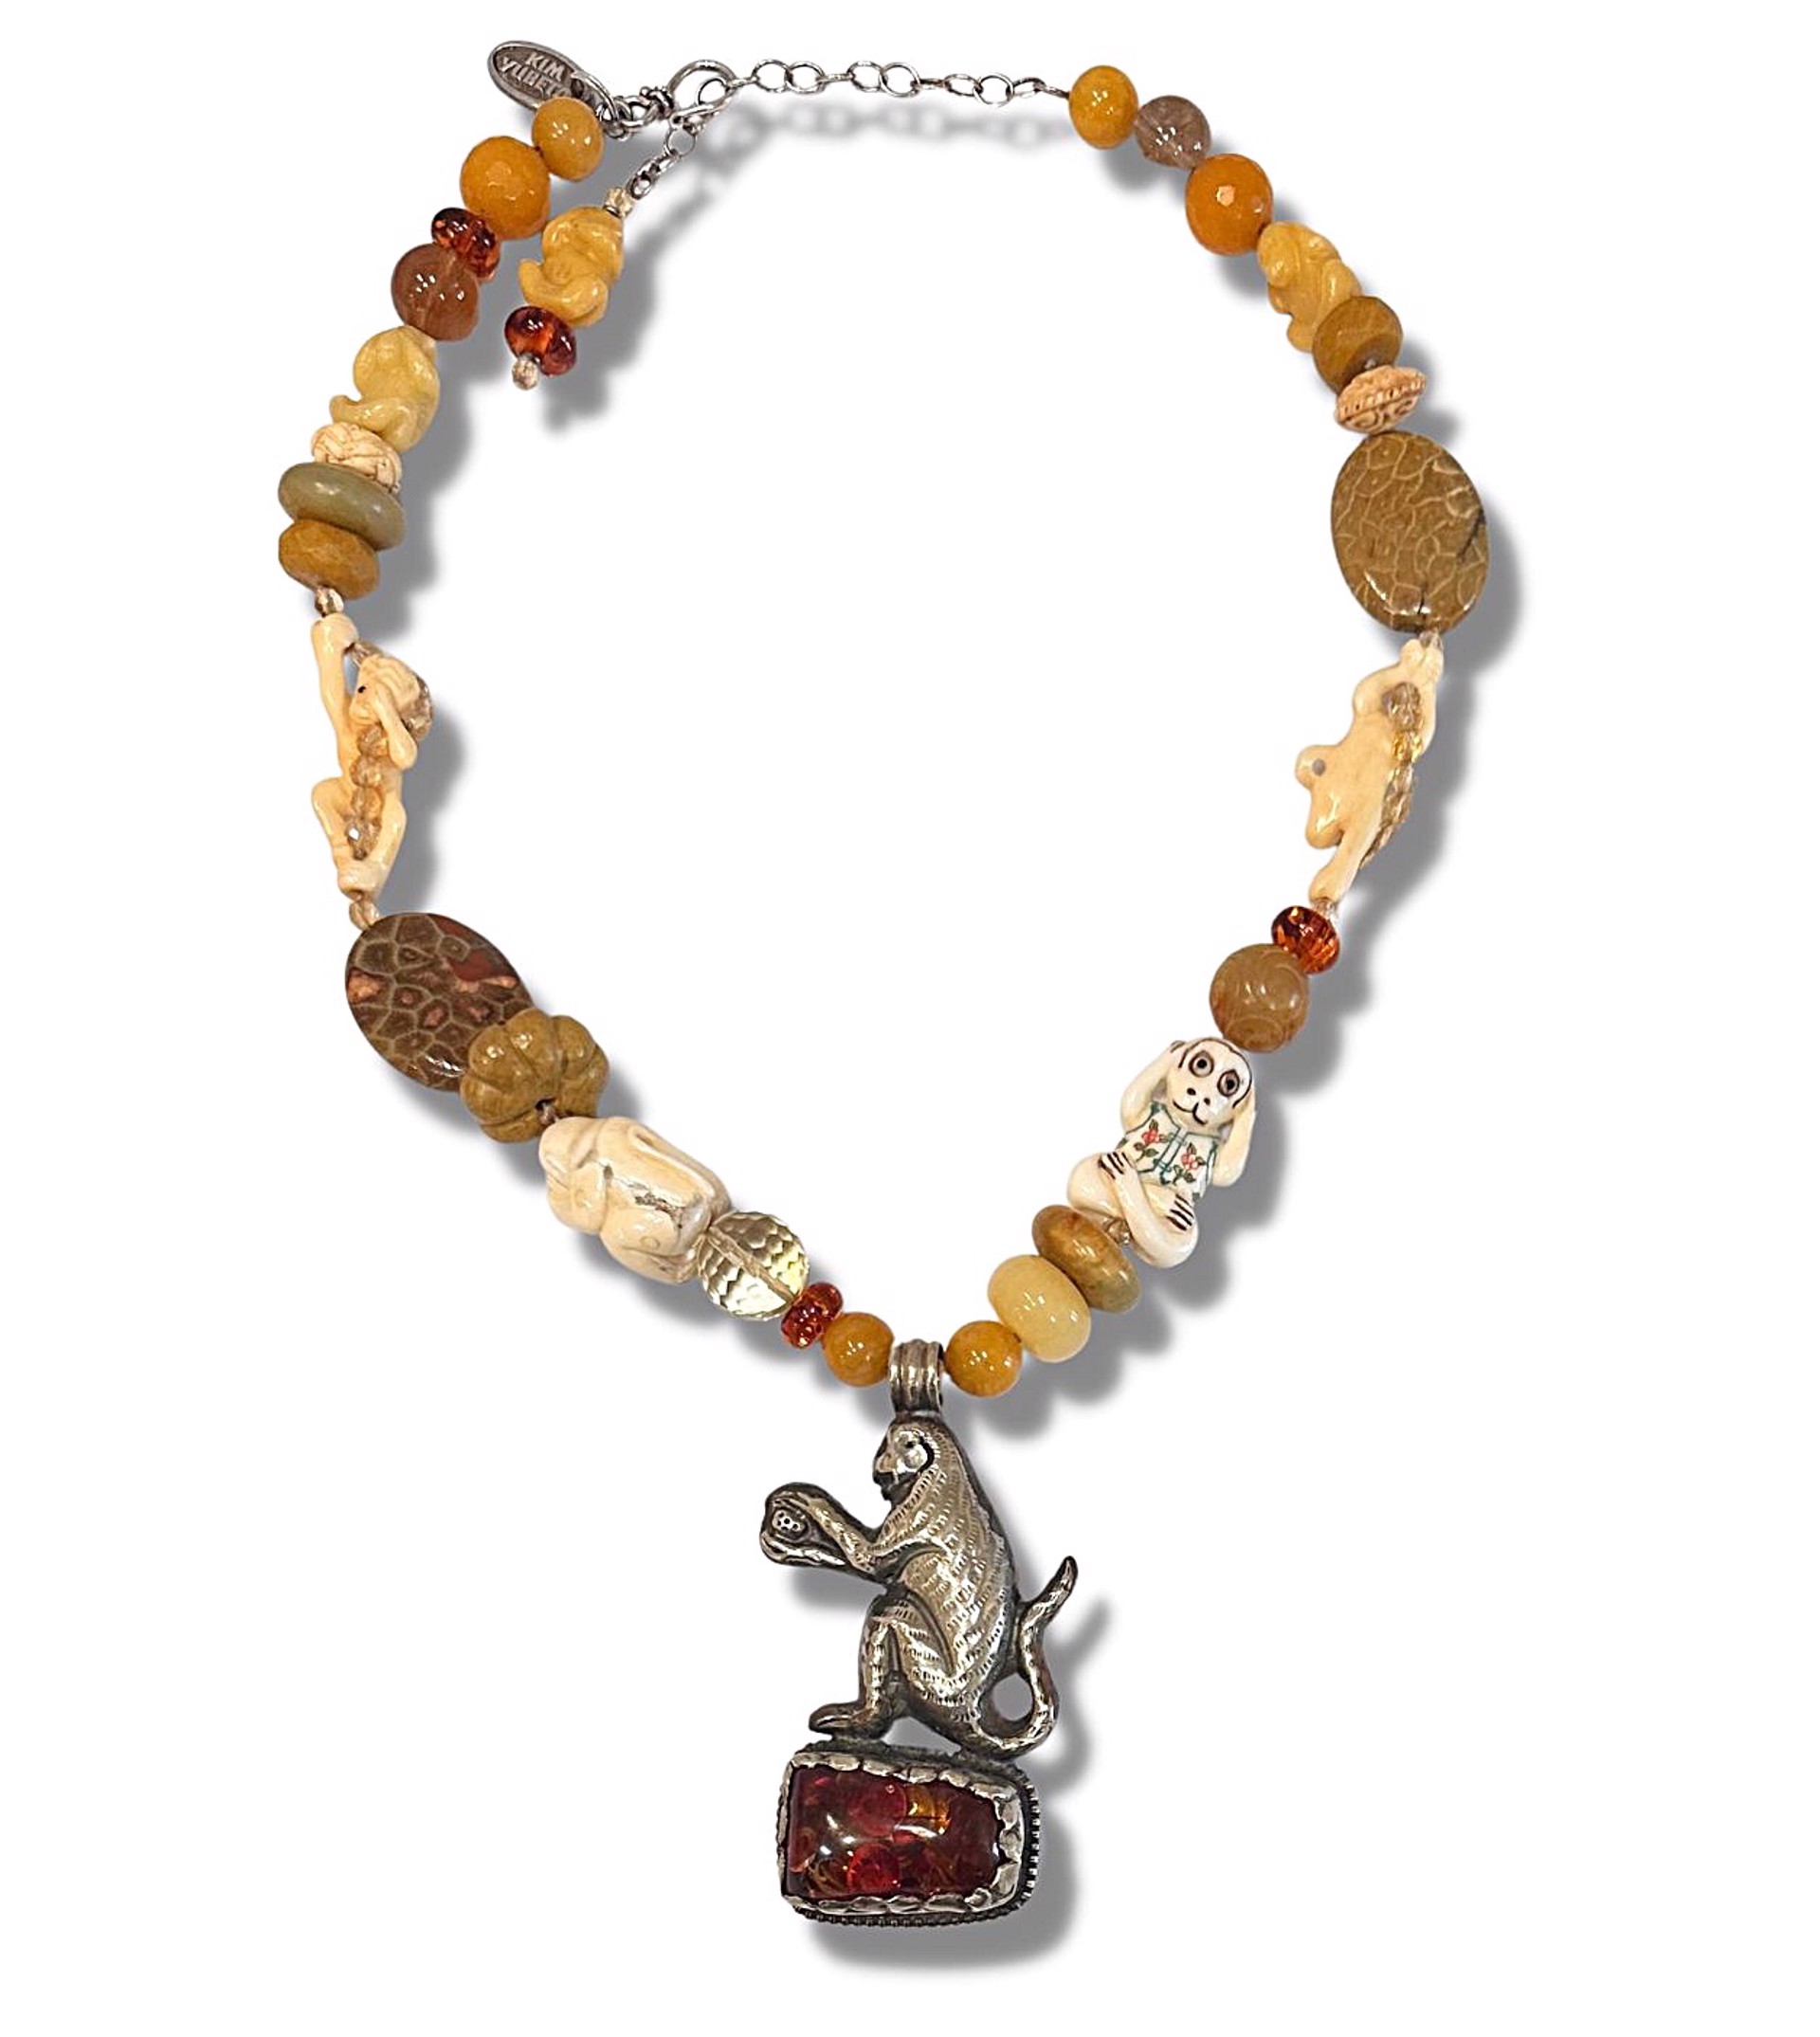 Necklace - Single Strand Tibetian Silver Monkey with Yellows, Brown, Jade, & Amber #6 by Kim Yubeta